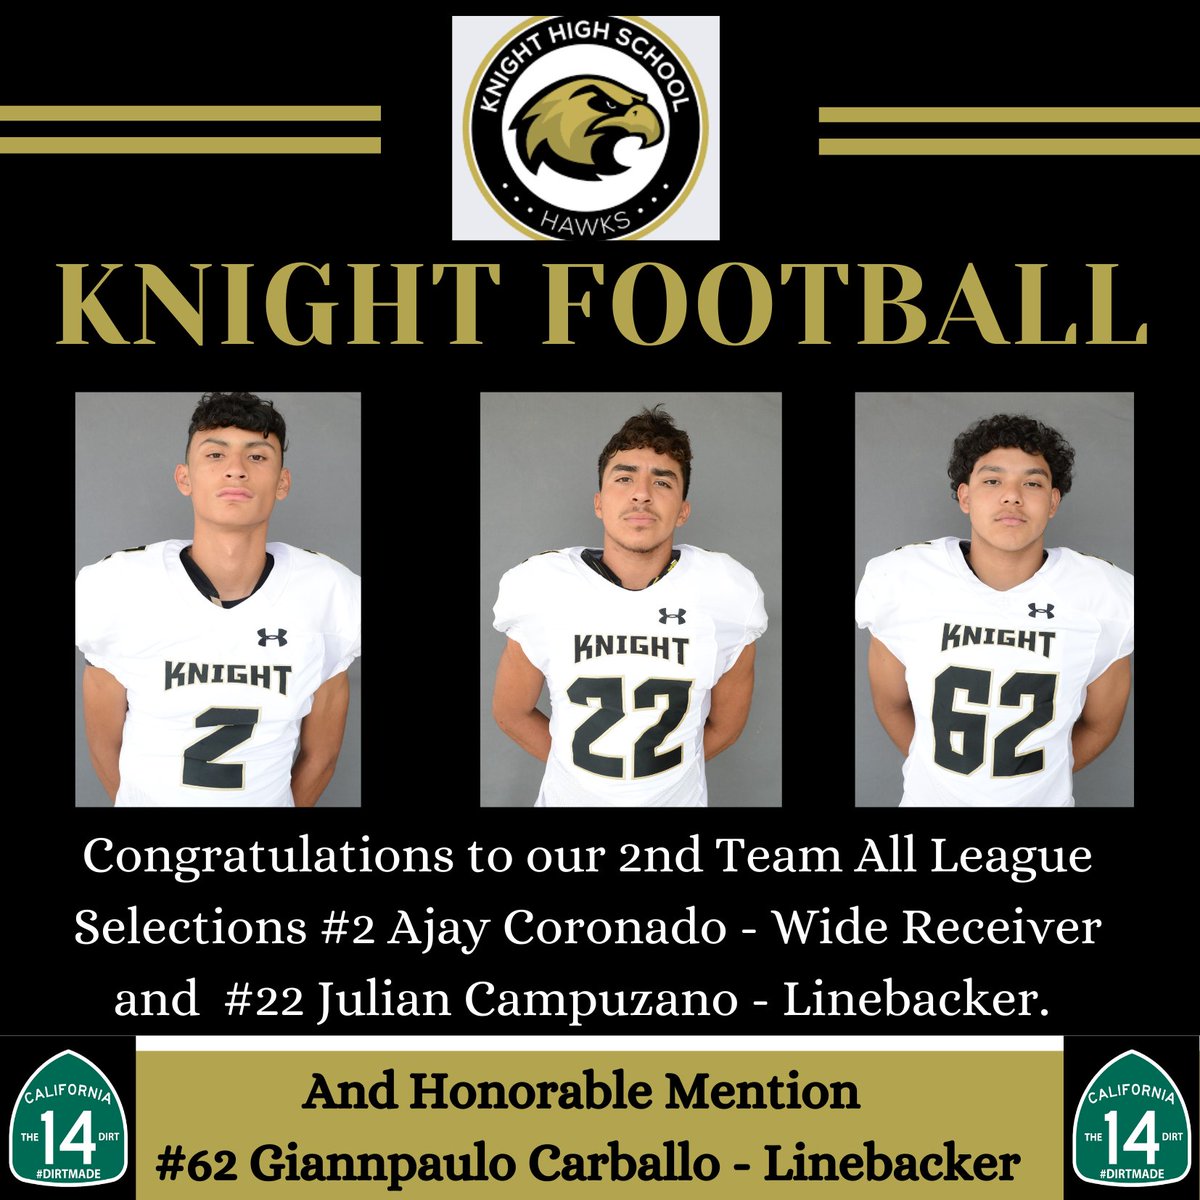 Congratulations to these young men and the work they did on the football field this season. #BlacknGold #AllLeague